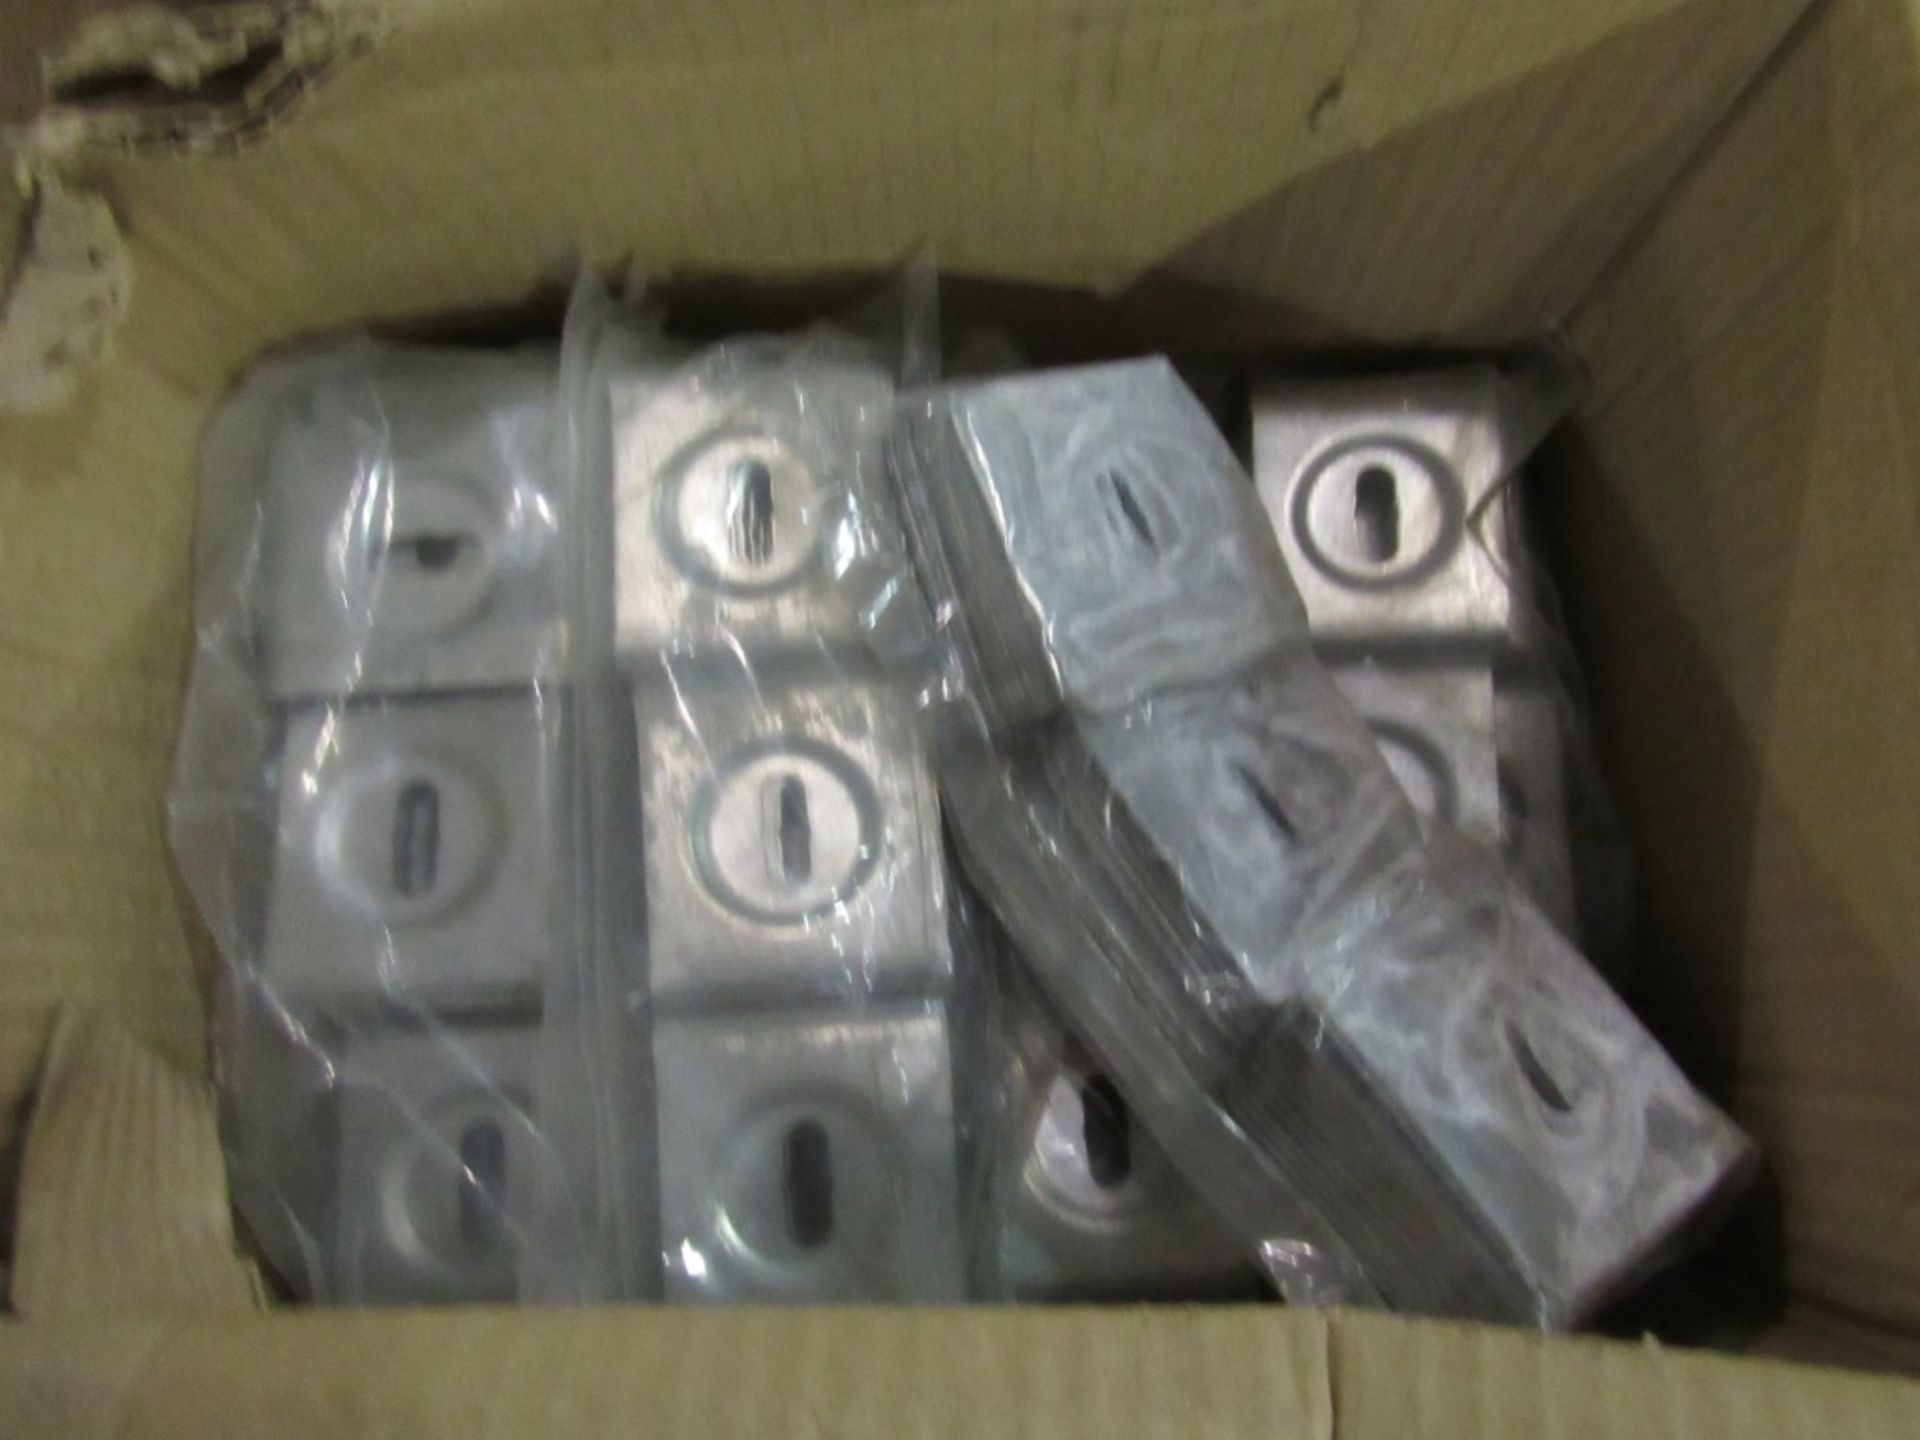 Assorted Washers- ***Located in Cleveland, TN*** MFR - Acroba (approx 2,000) Washers 2" - Image 5 of 7